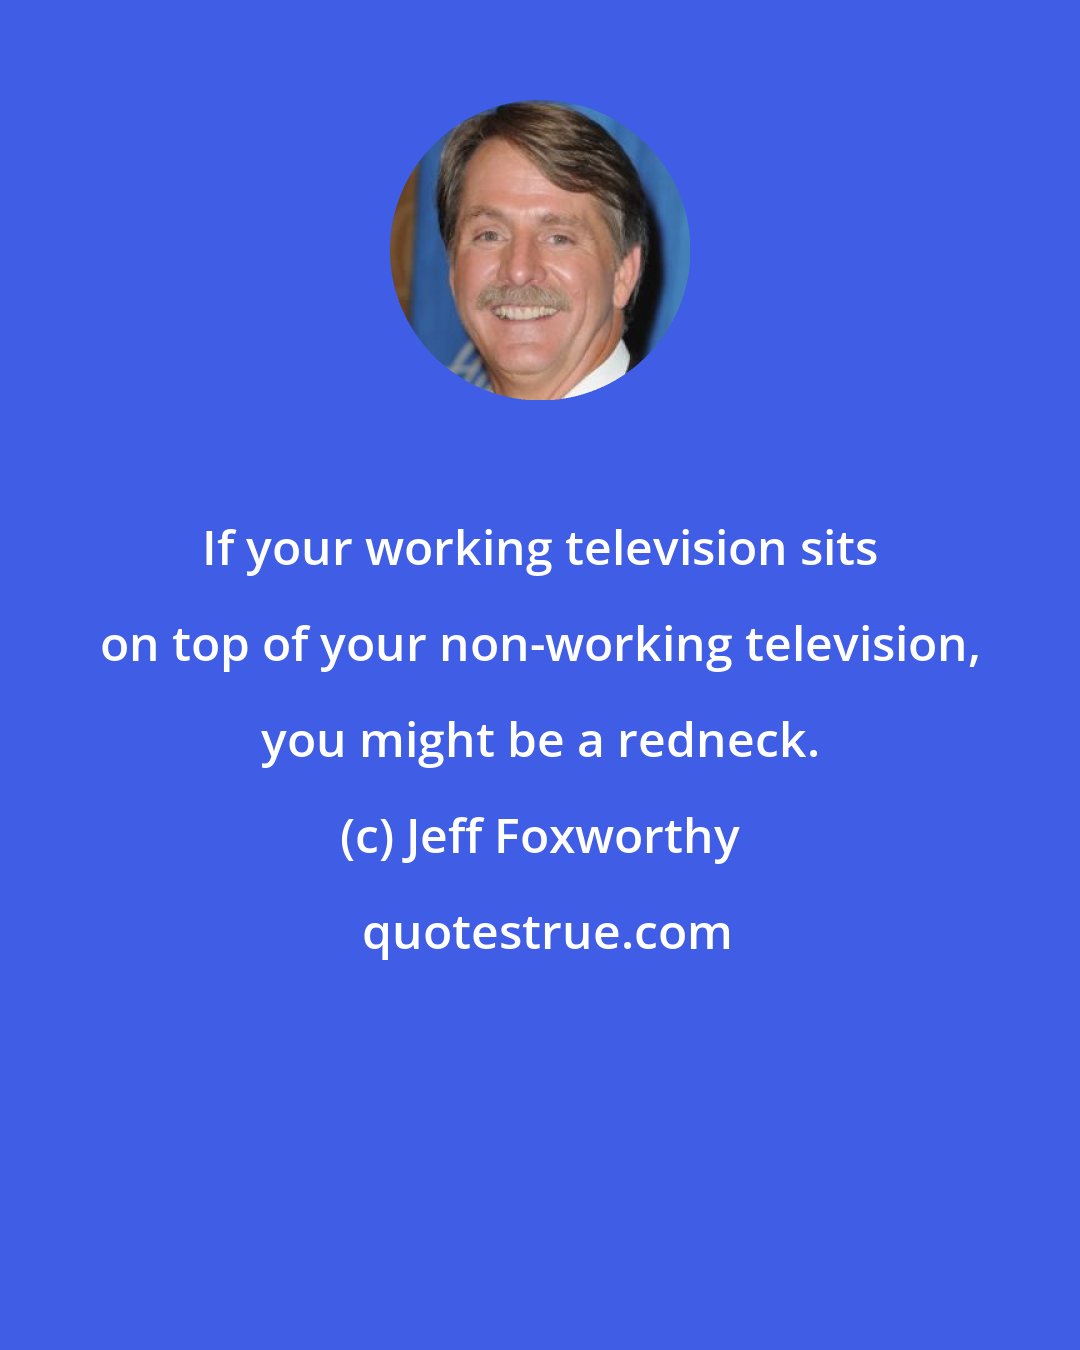 Jeff Foxworthy: If your working television sits on top of your non-working television, you might be a redneck.